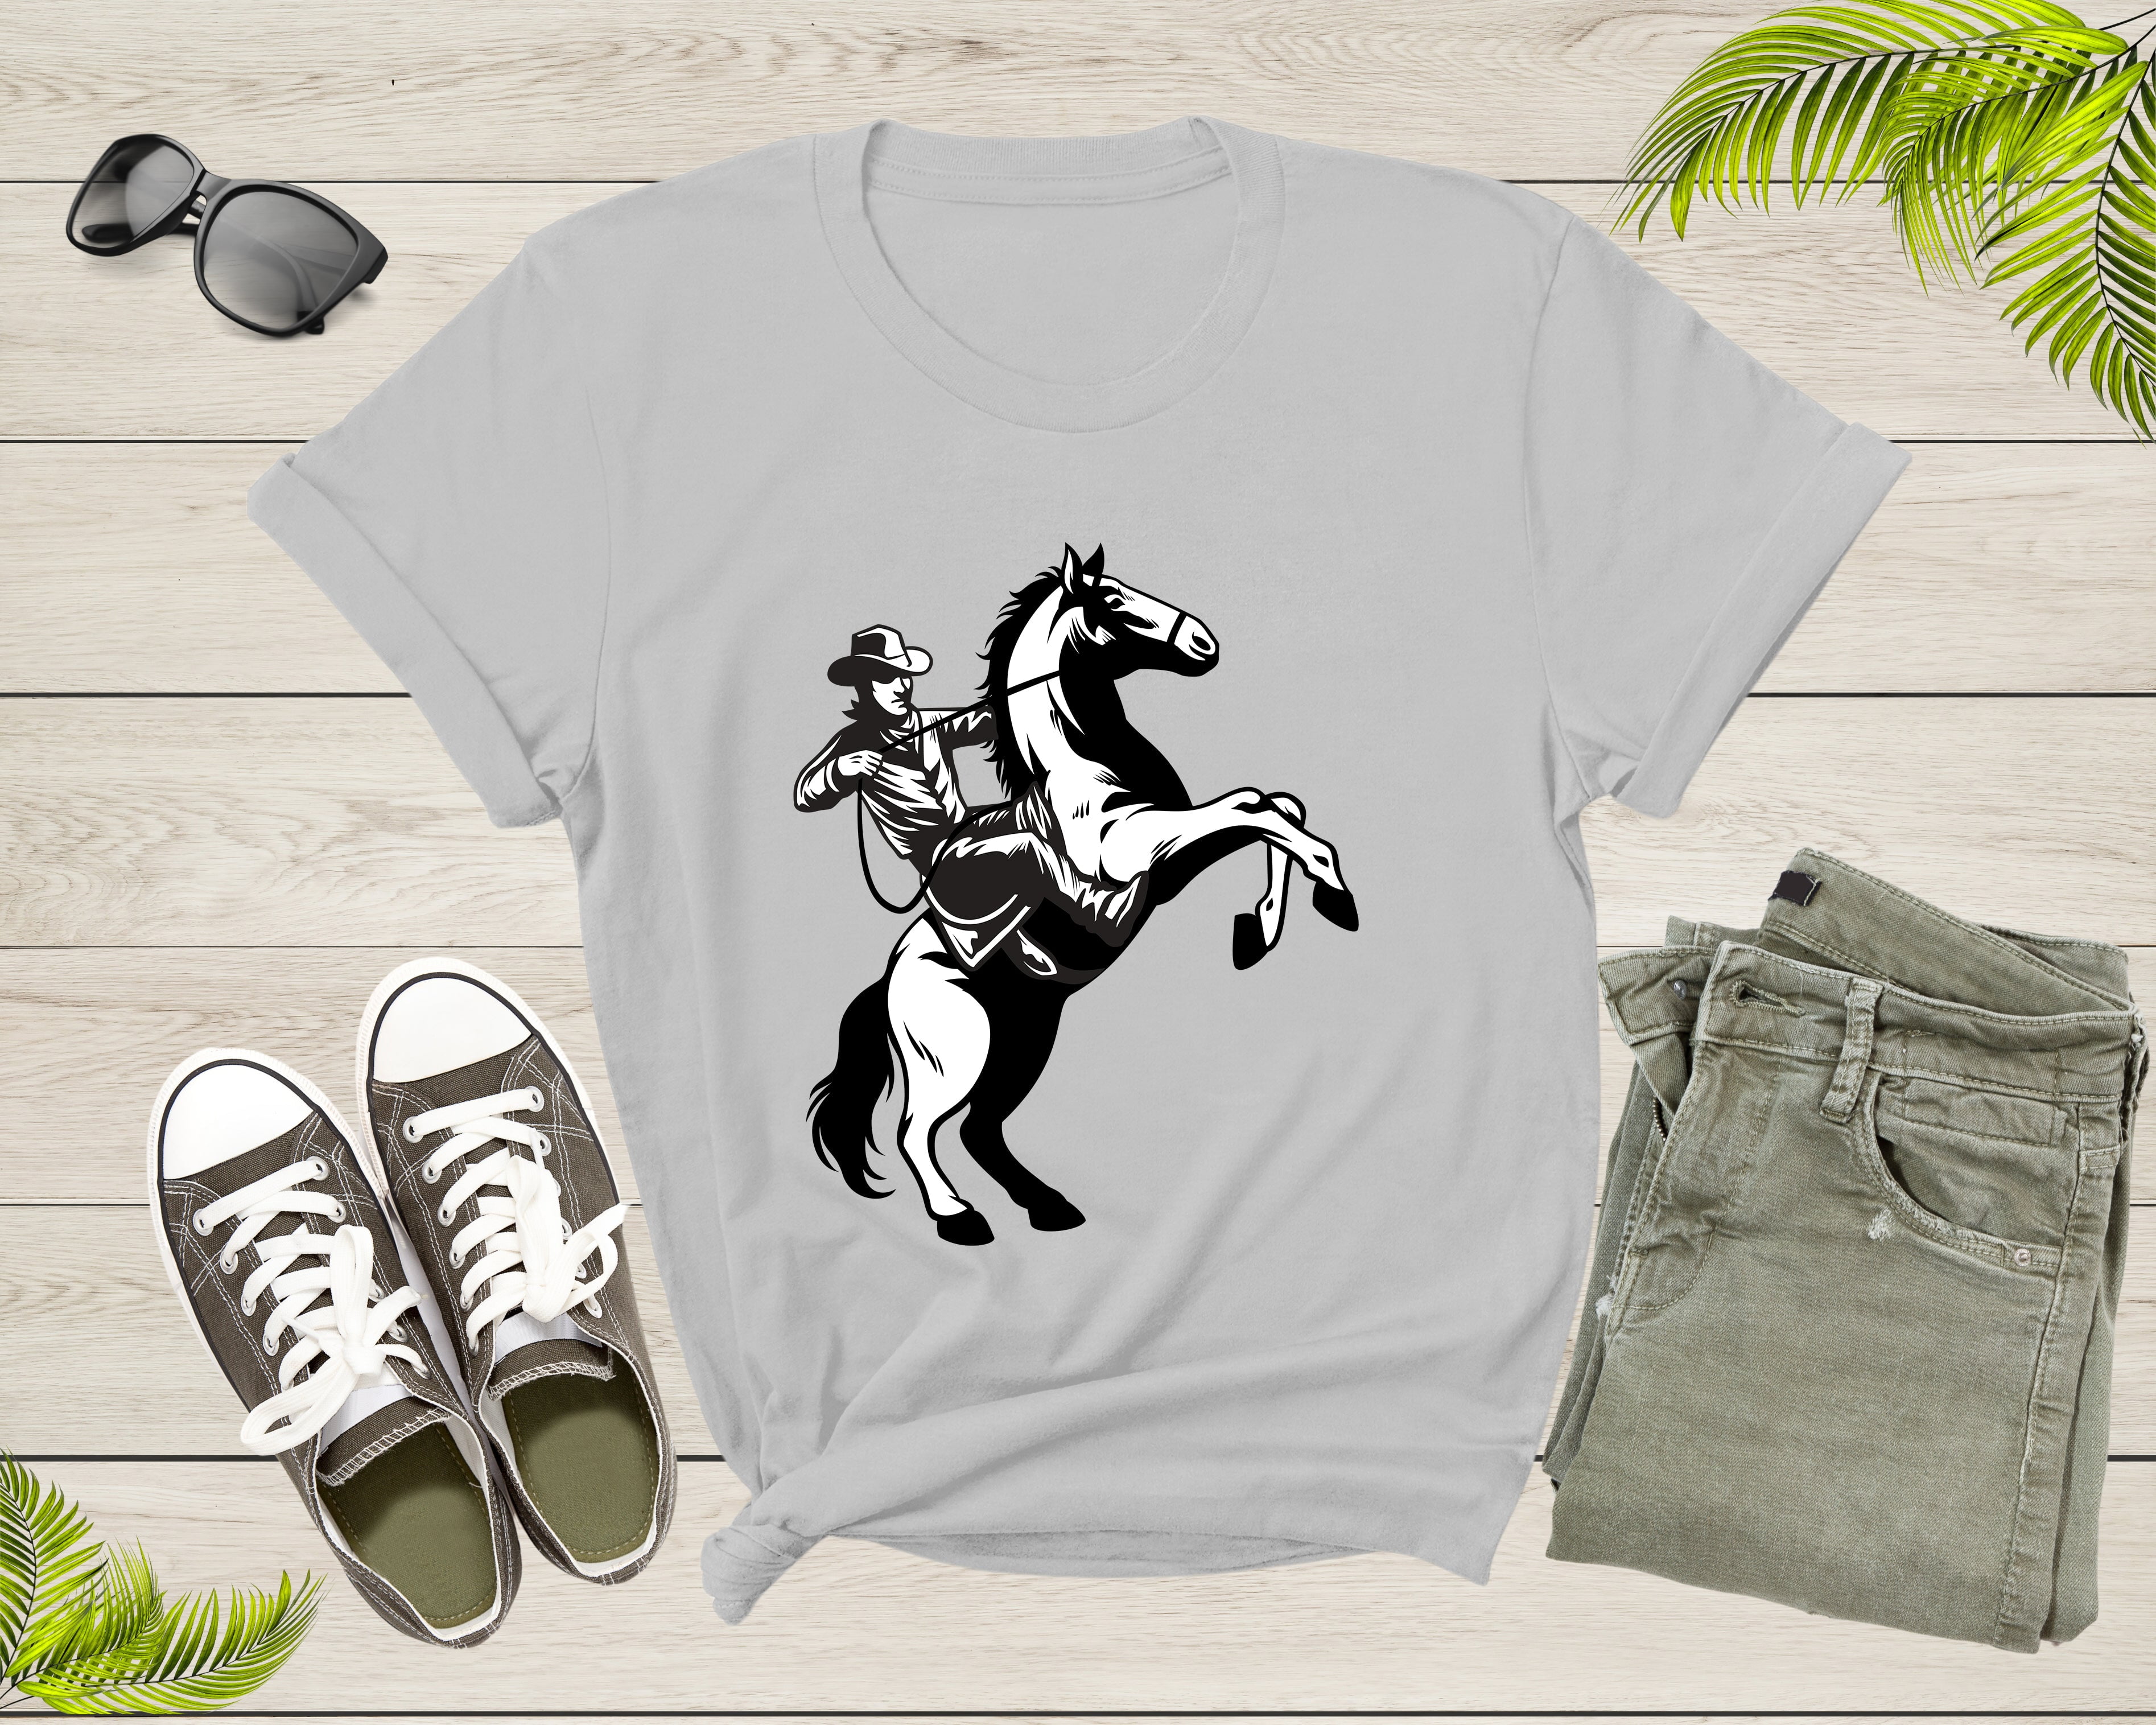 Weekends Are For Coffee and Horses T-Shirt, Gift for Horse Lover,  Equestrian Rider TShirt, Rodeo and Ranch Horse Tee, Pony and Horse Stud